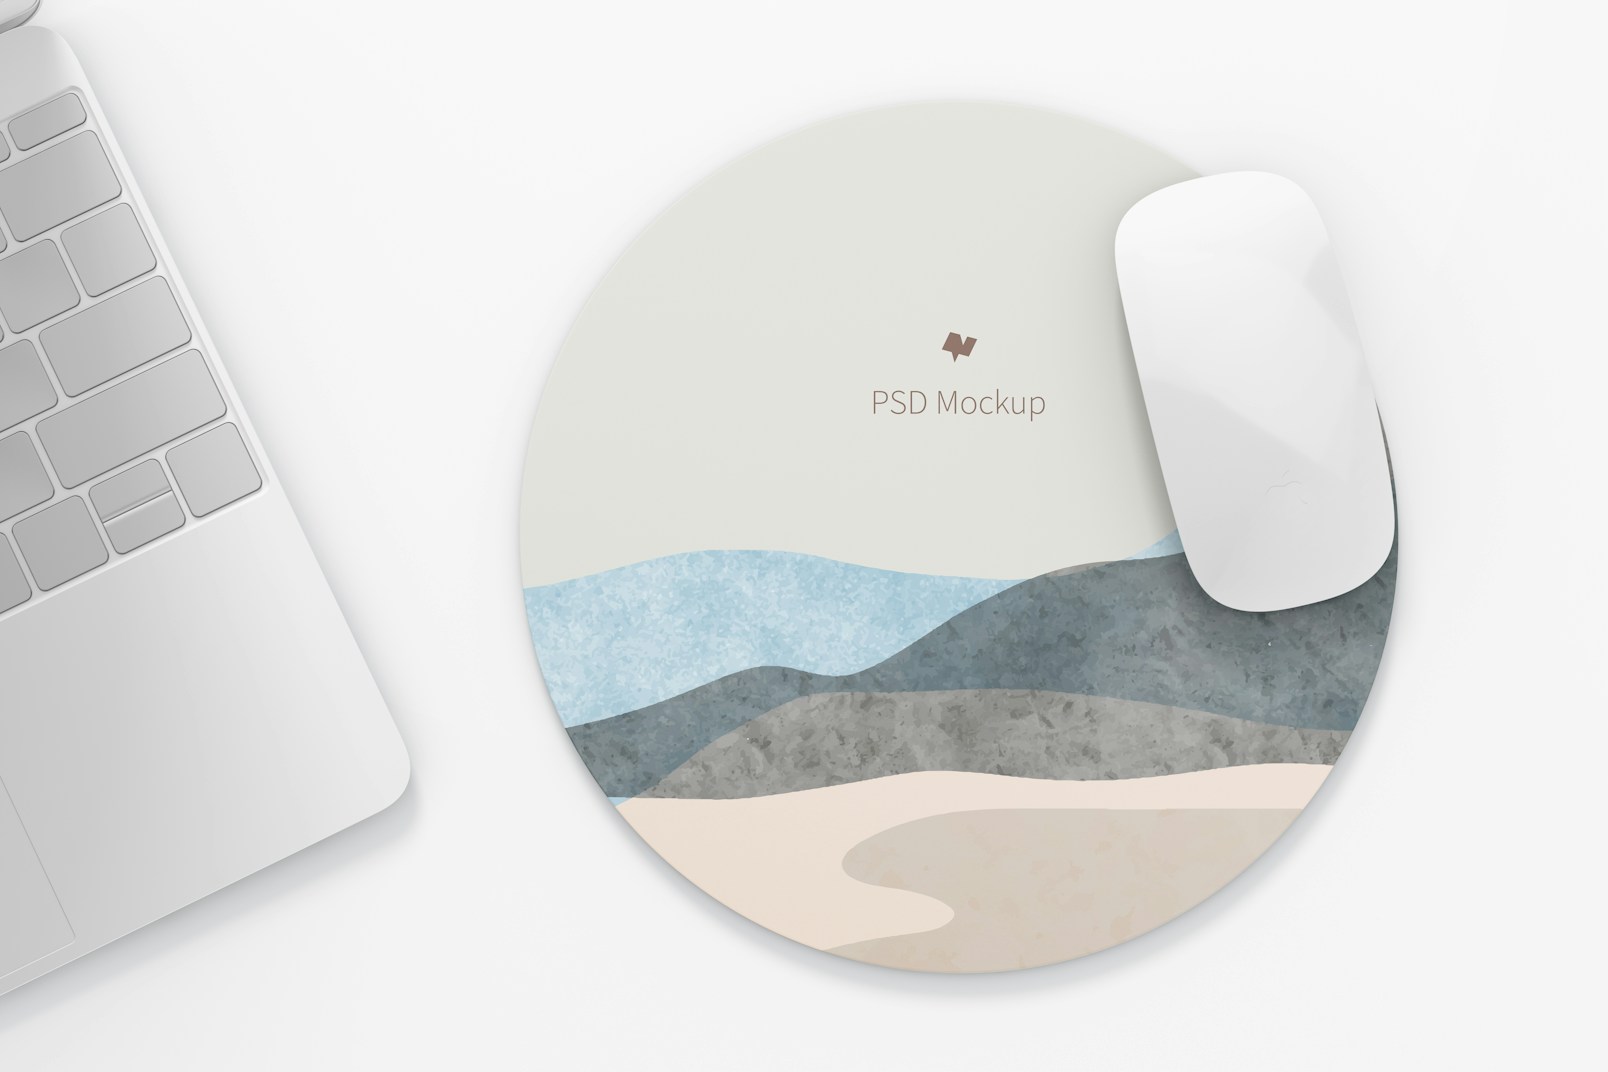 Round Silicone Mouse Pad Mockup